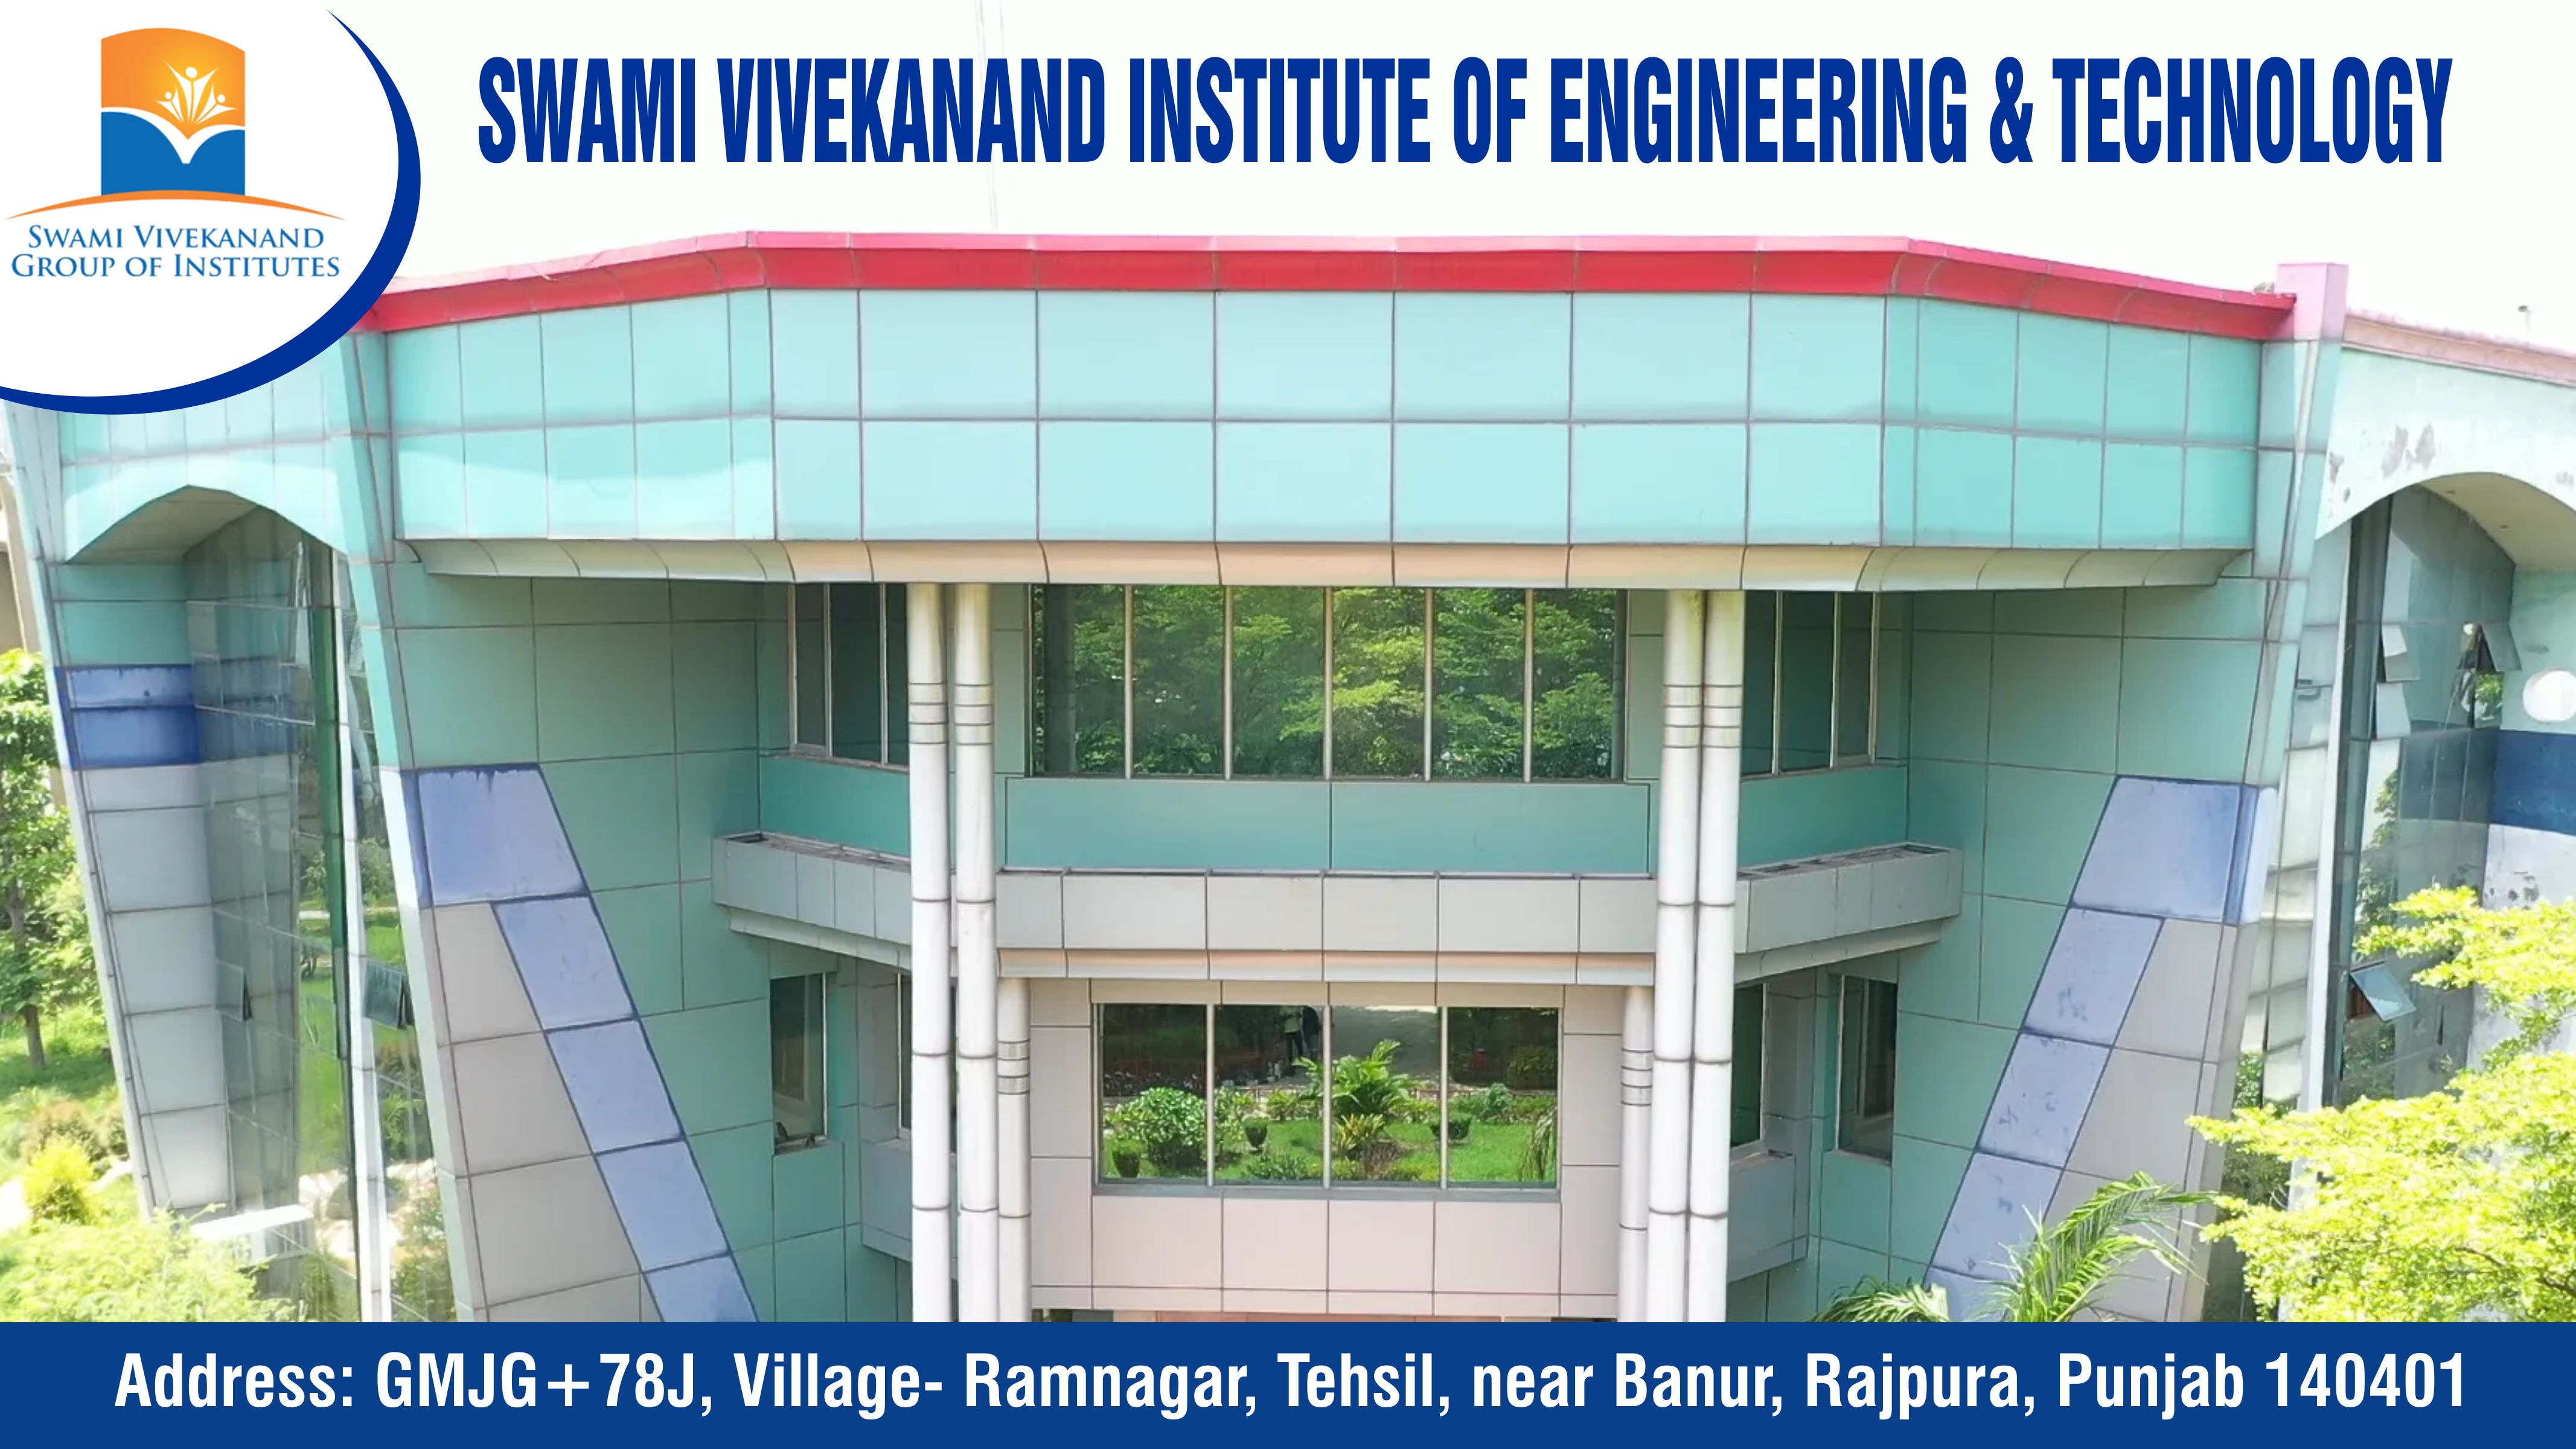 Out Side View of Swami Vivekanand Institute of Engineering & Technology (SVIET)